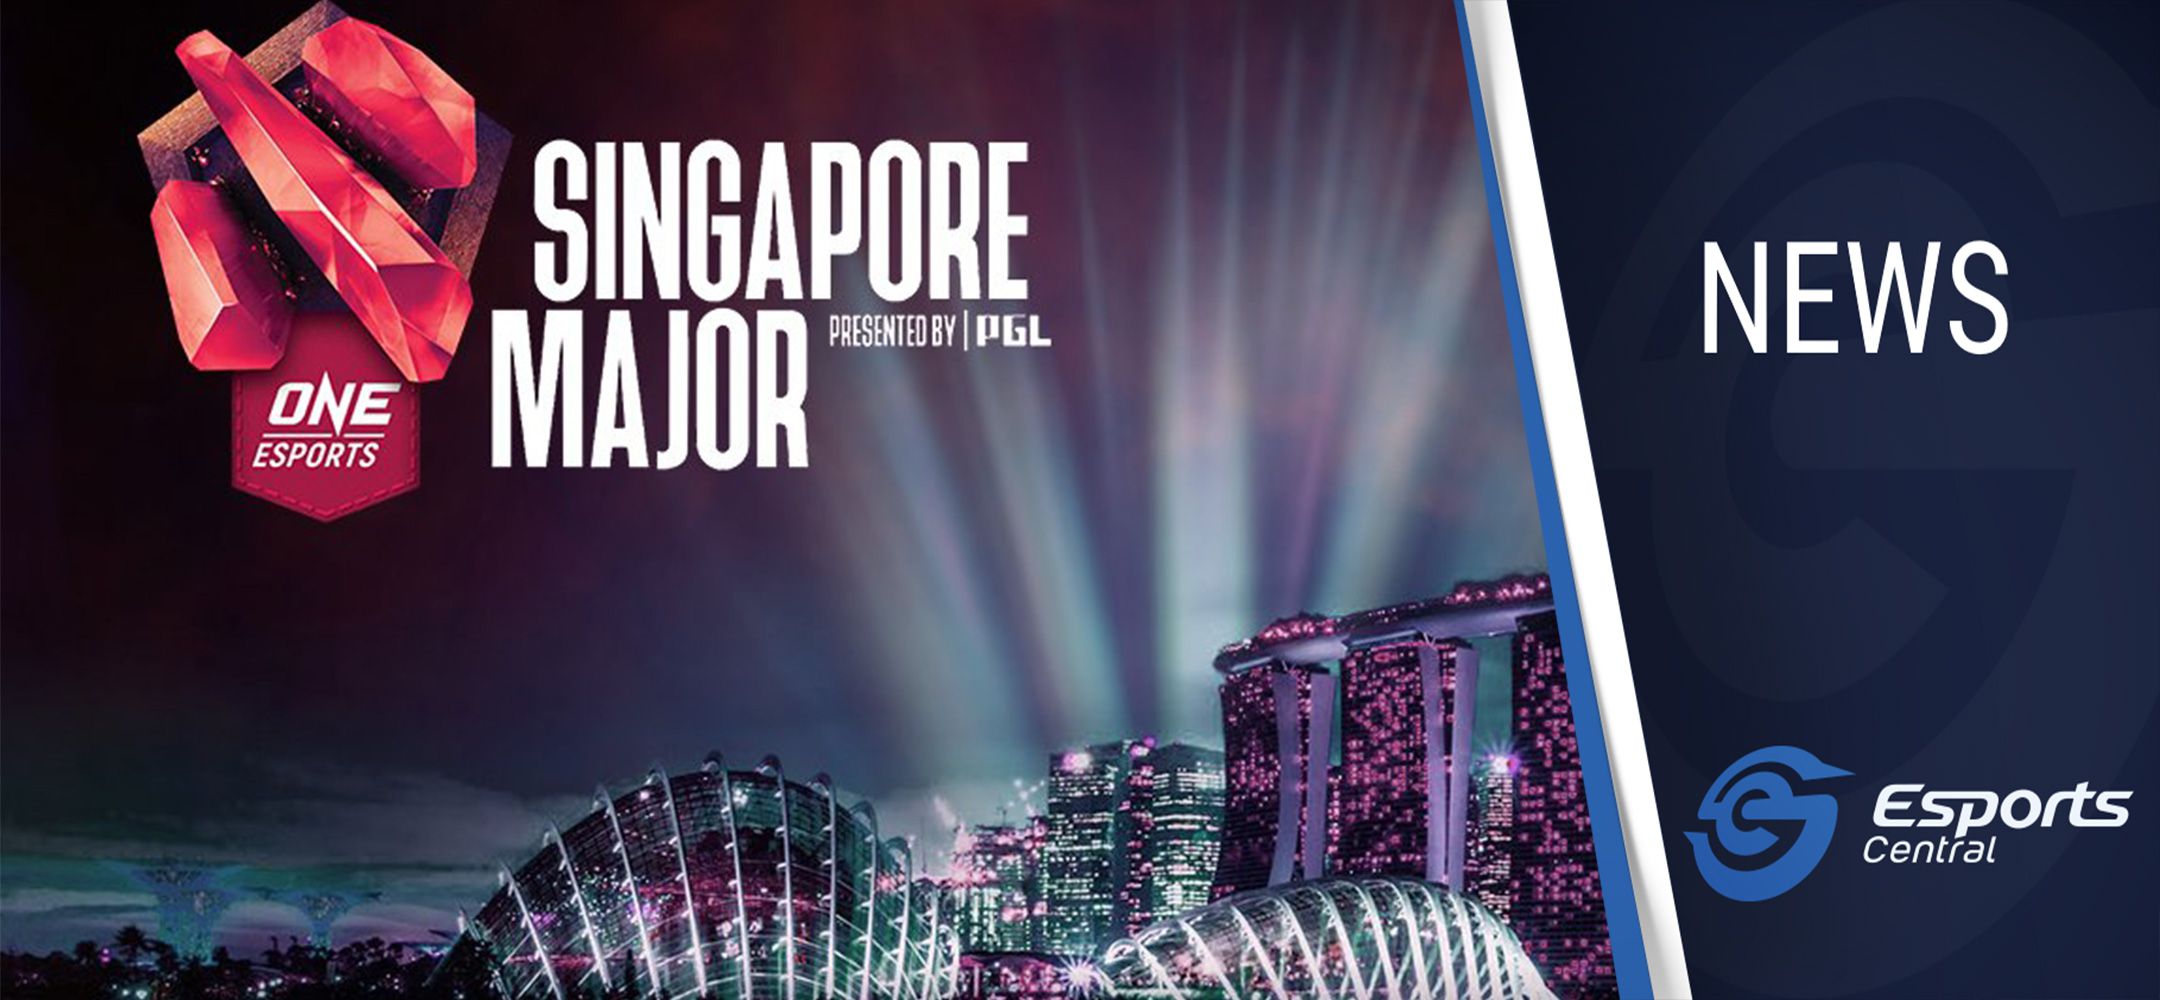 Dota 2 Singapore Major: How to watch, schedule, format and teams - Esports Central